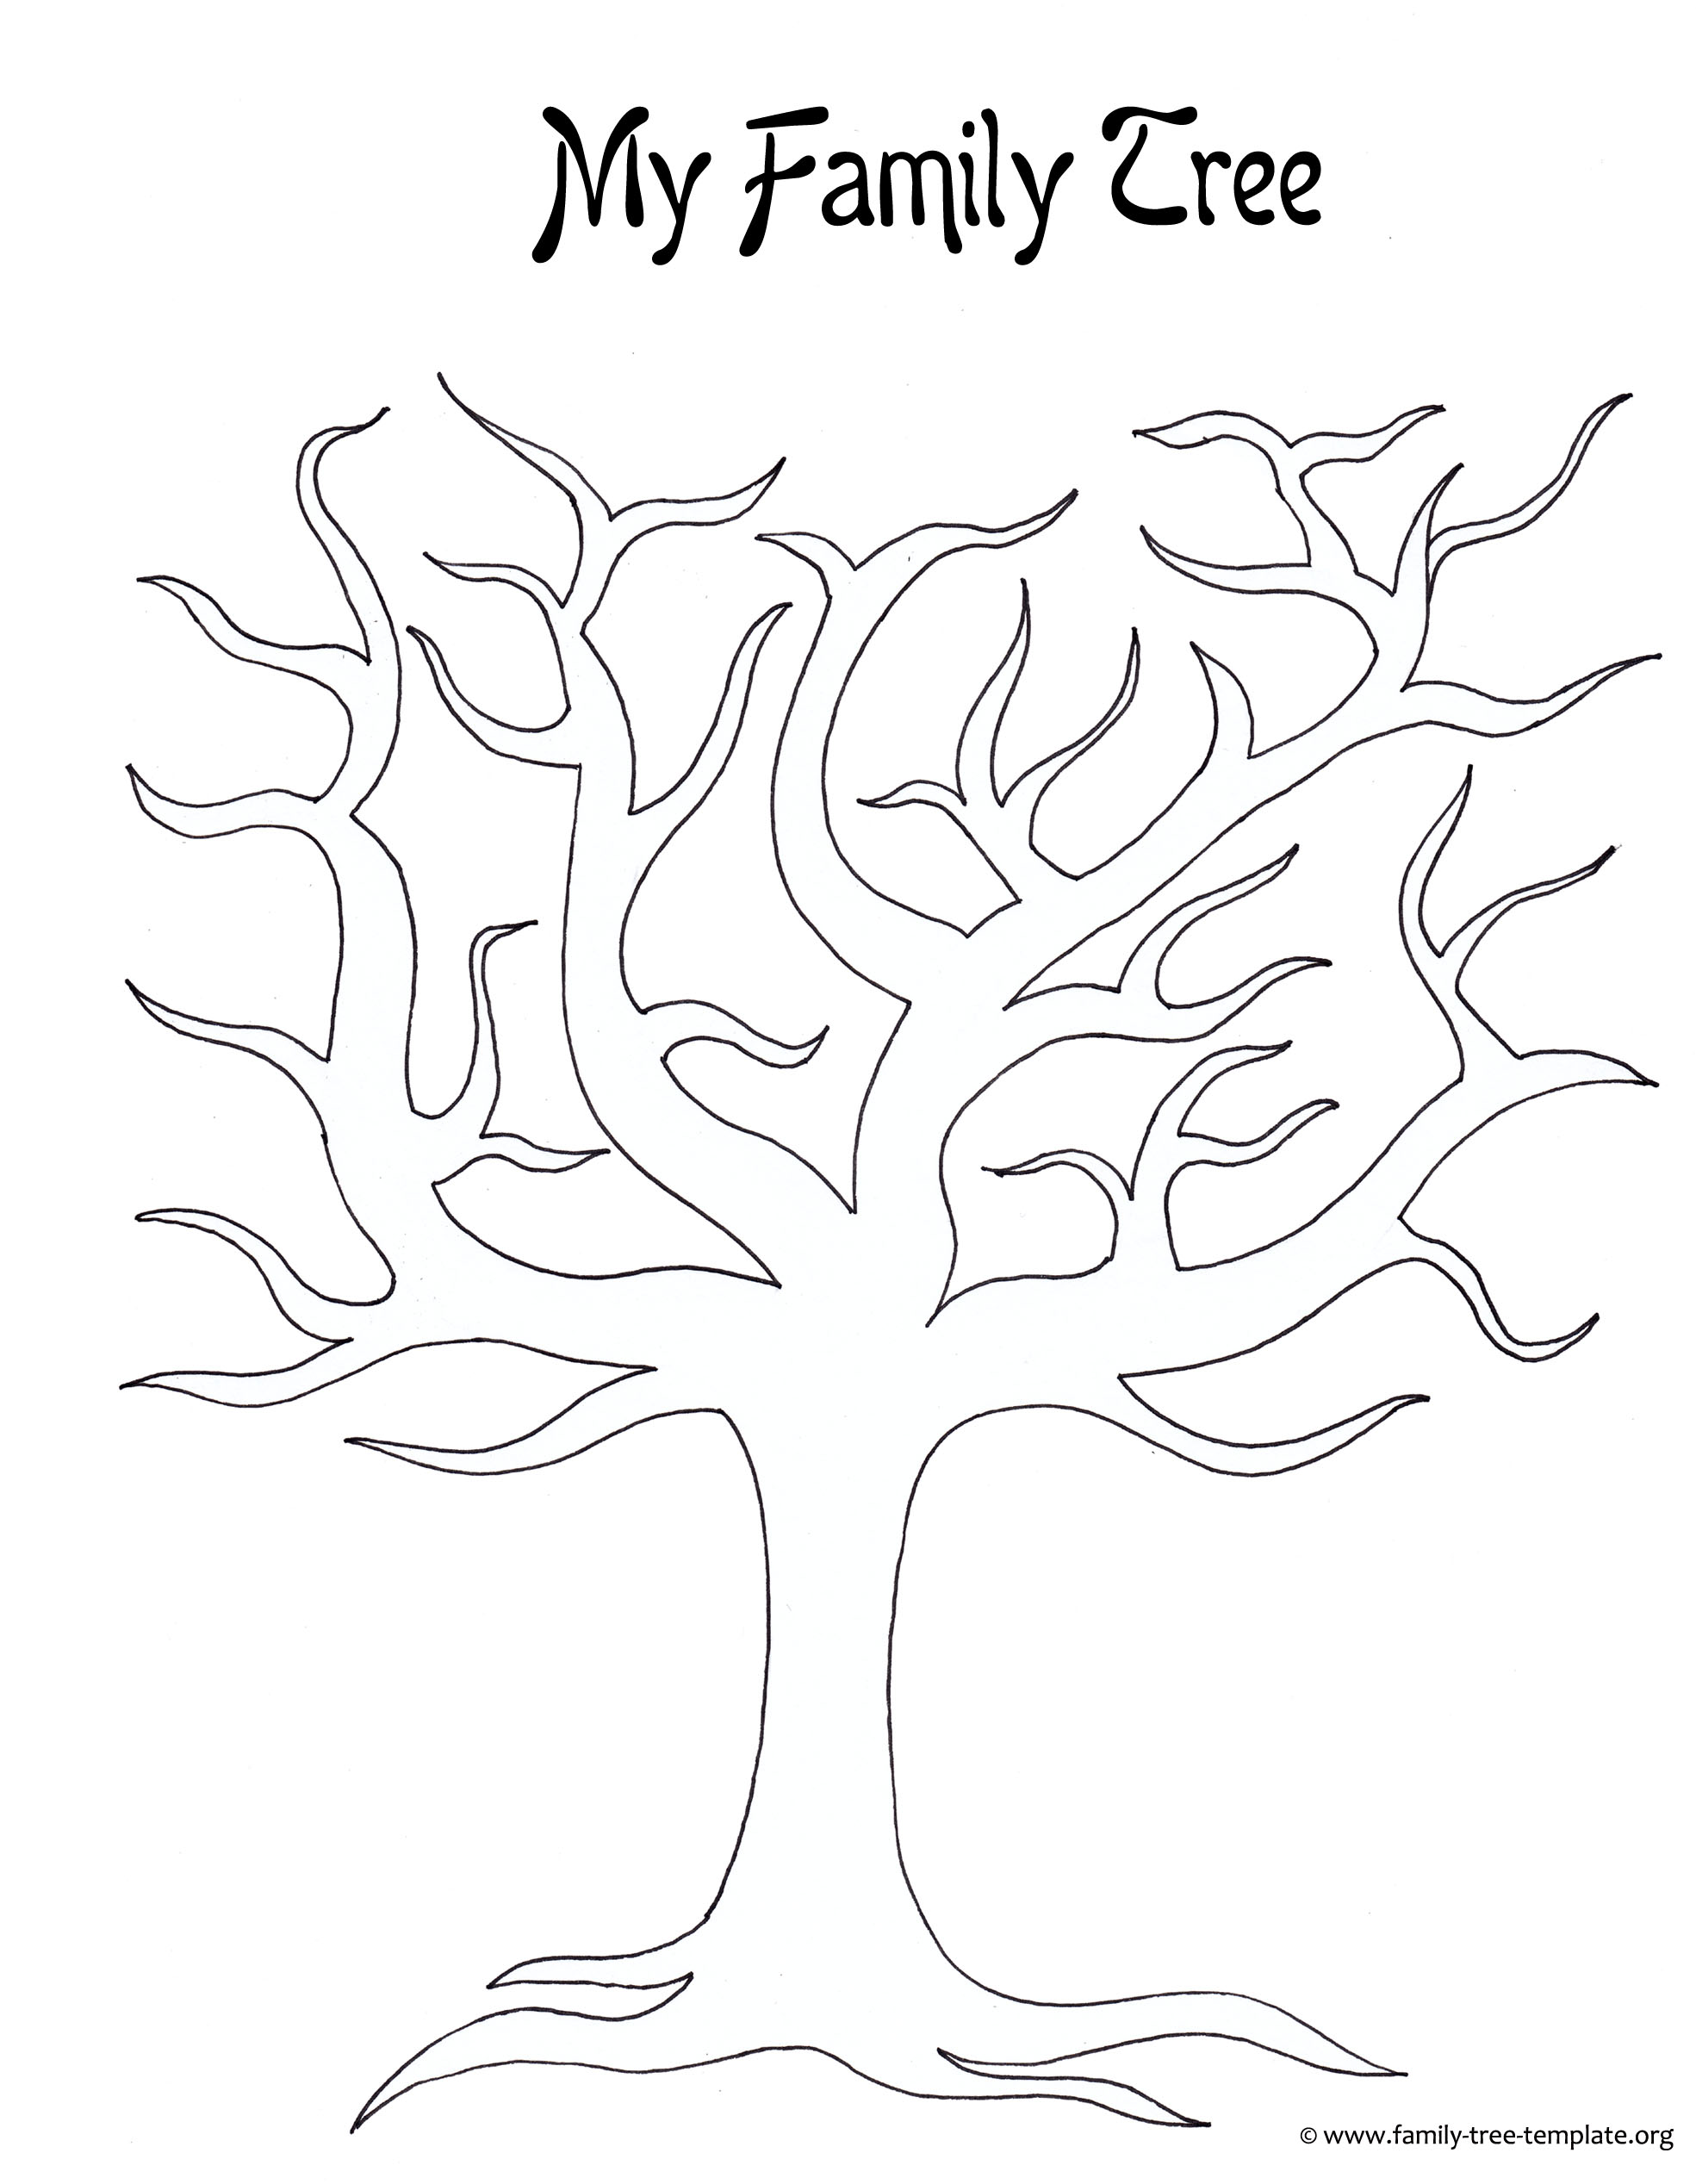 pin-by-maggie-stratford-on-project-family-tree-printable-blank